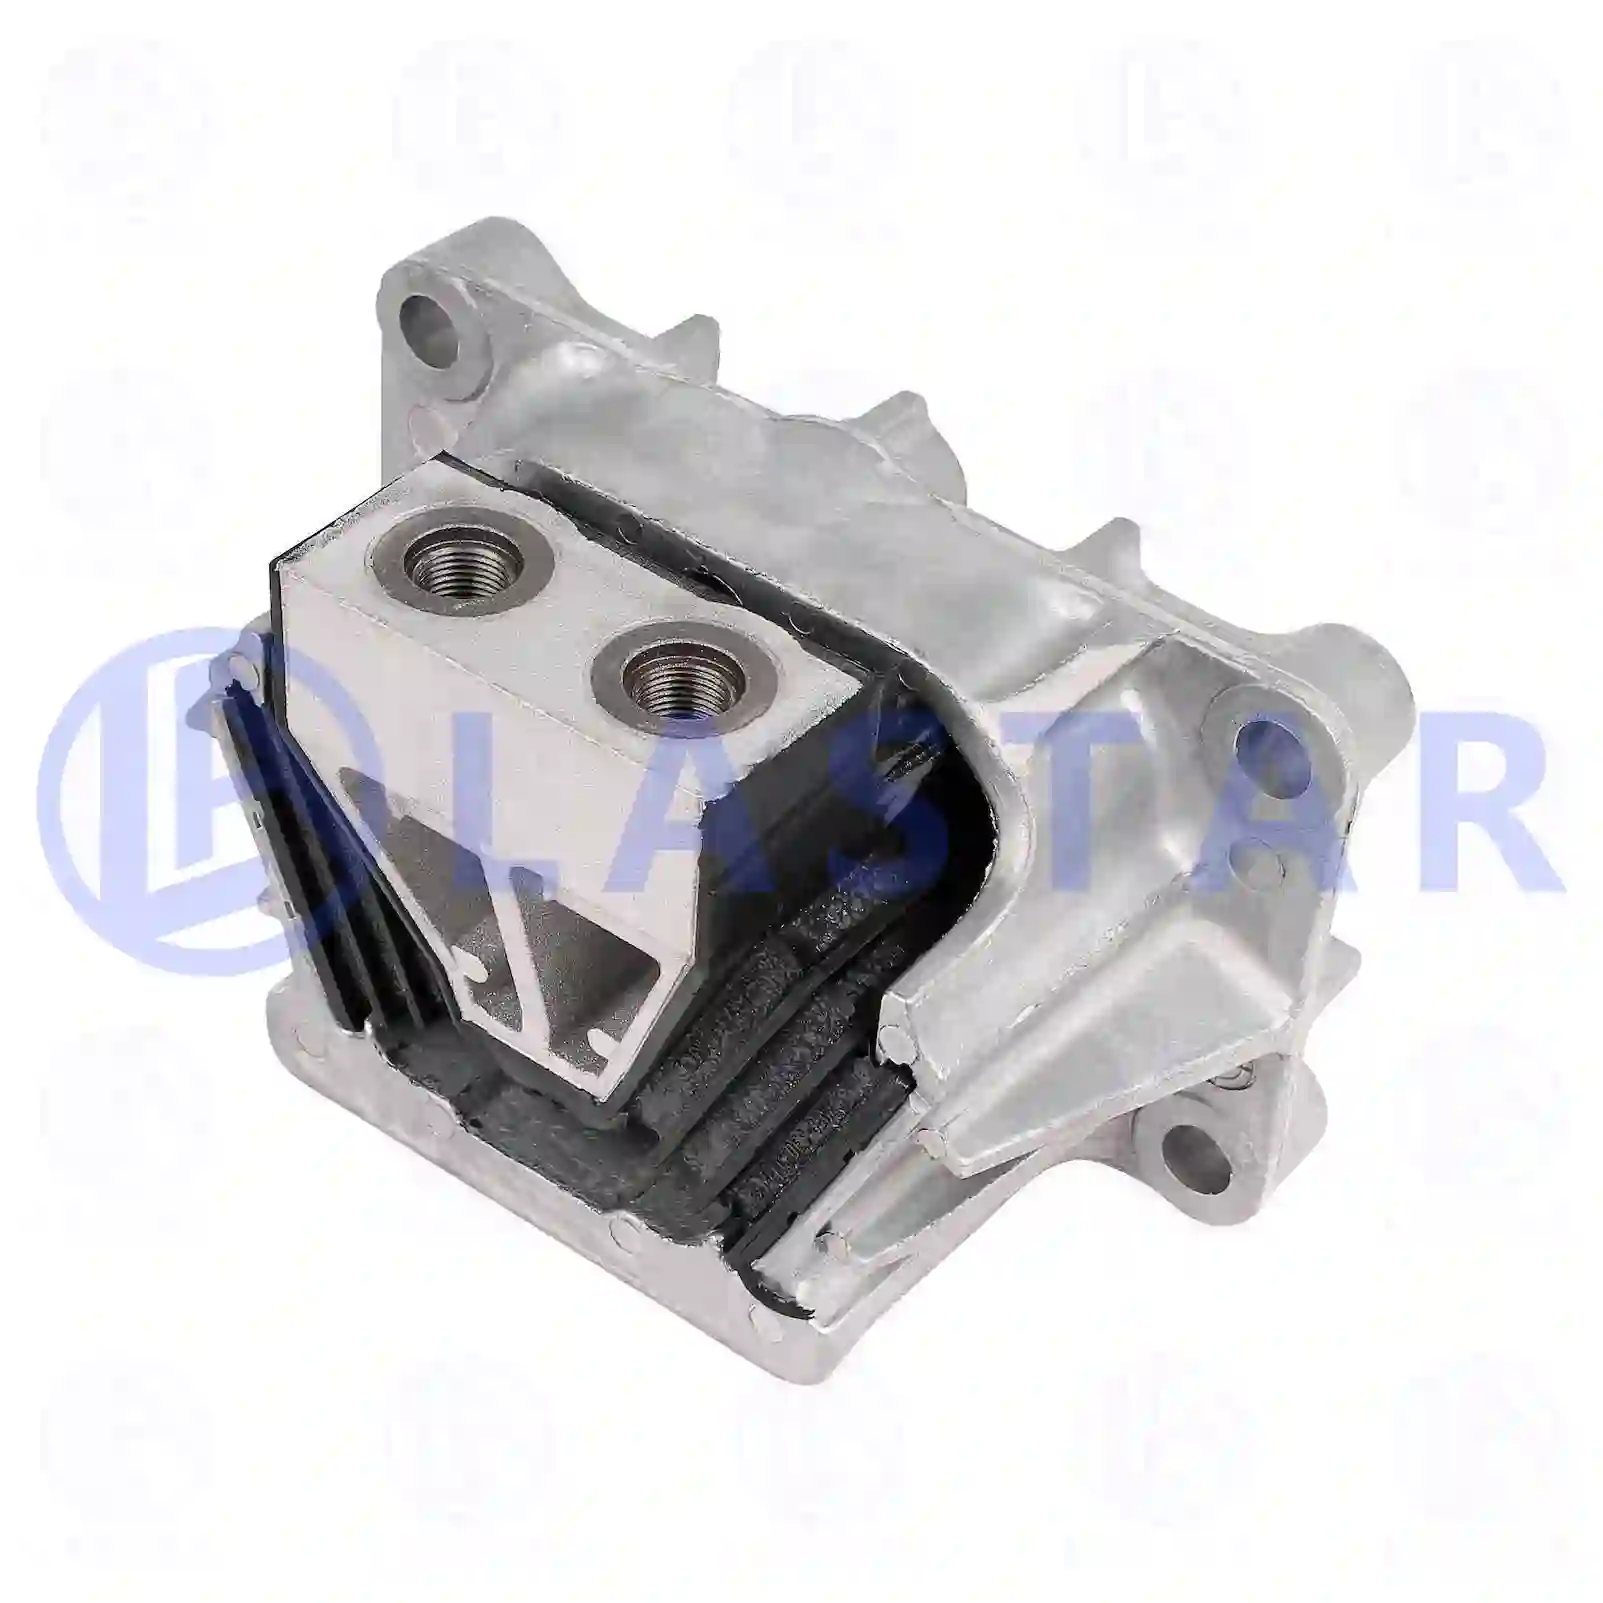 Engine mounting, 77702423, 6282402717, , , , , ||  77702423 Lastar Spare Part | Truck Spare Parts, Auotomotive Spare Parts Engine mounting, 77702423, 6282402717, , , , , ||  77702423 Lastar Spare Part | Truck Spare Parts, Auotomotive Spare Parts